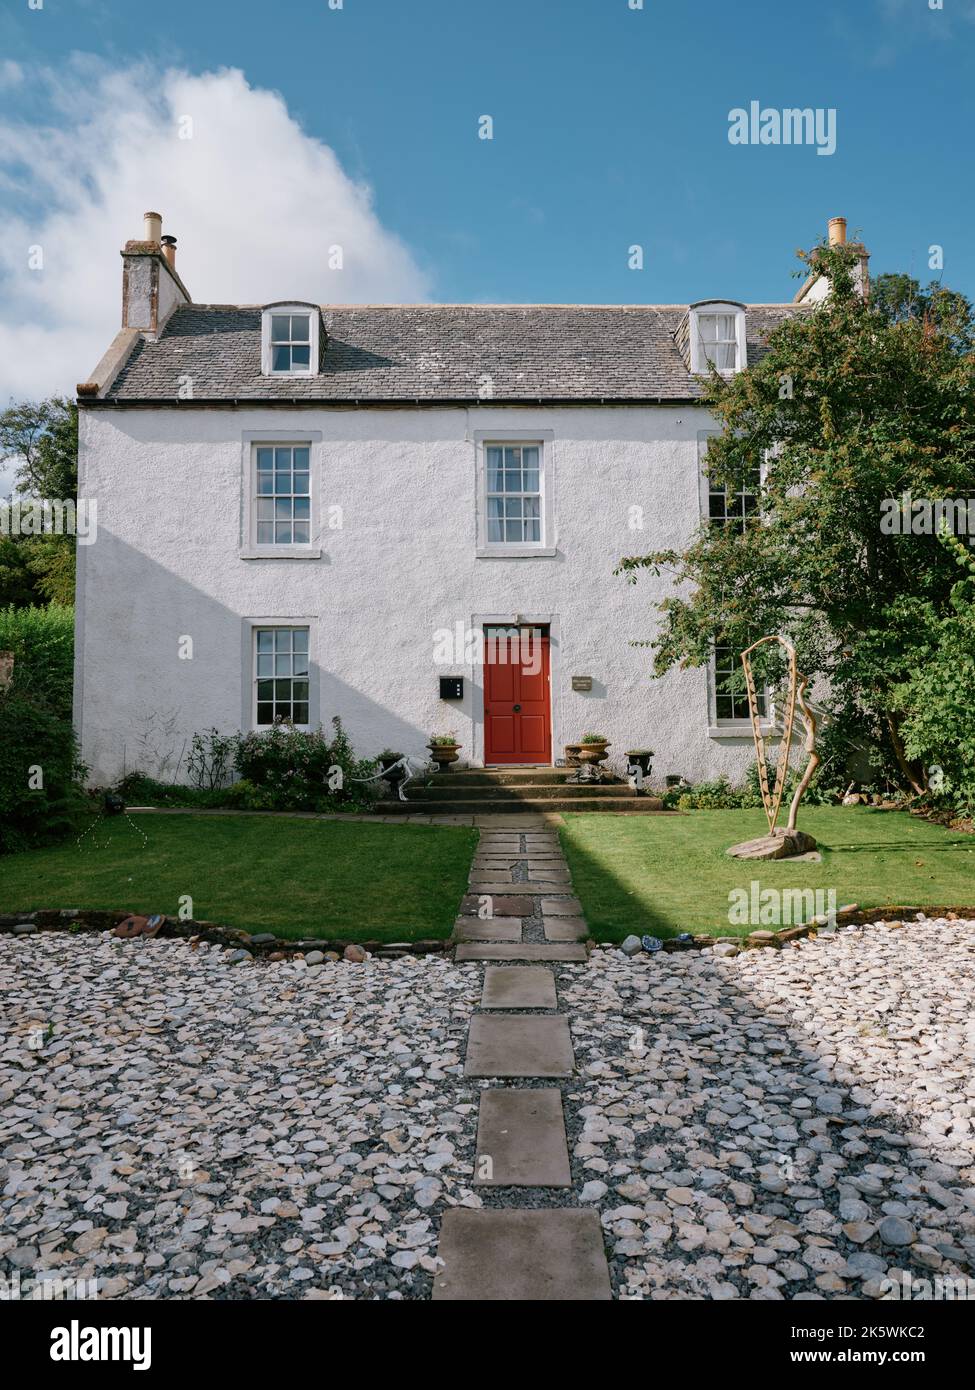 The house and garden architecture of the old town in Cromarty, Black Isle, Ross & Cromarty, Highland, Scotland UK Stock Photo